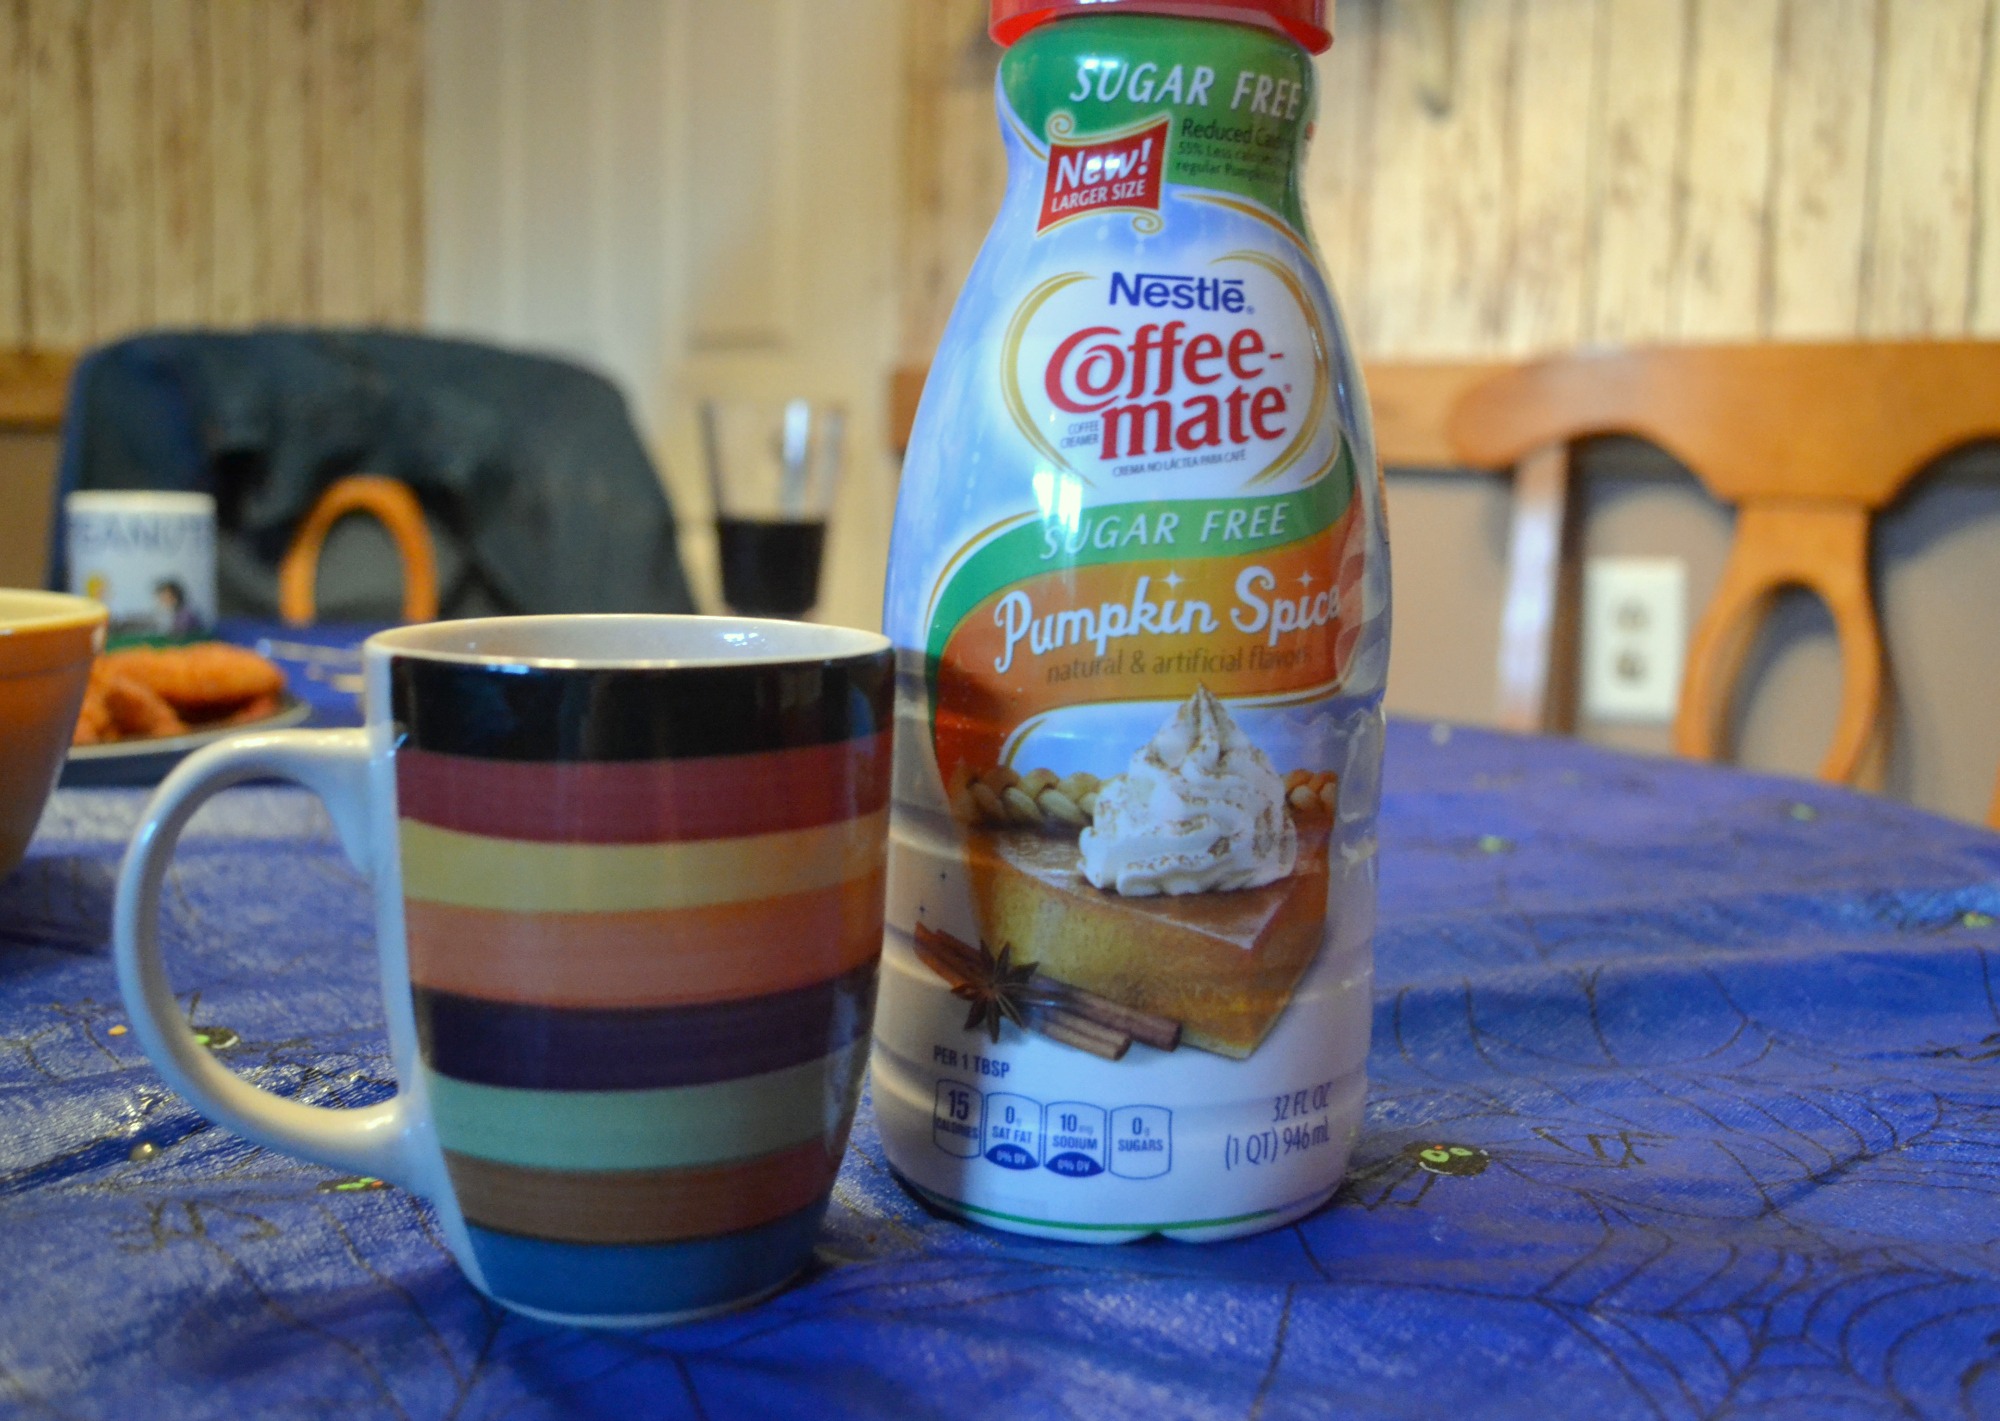 Family Moments with Nestle Coffeemate (& A Cherry Cream Cheese Coffeecake Recipe!) #LoveYourCup #Shop | Optimistic Mommy